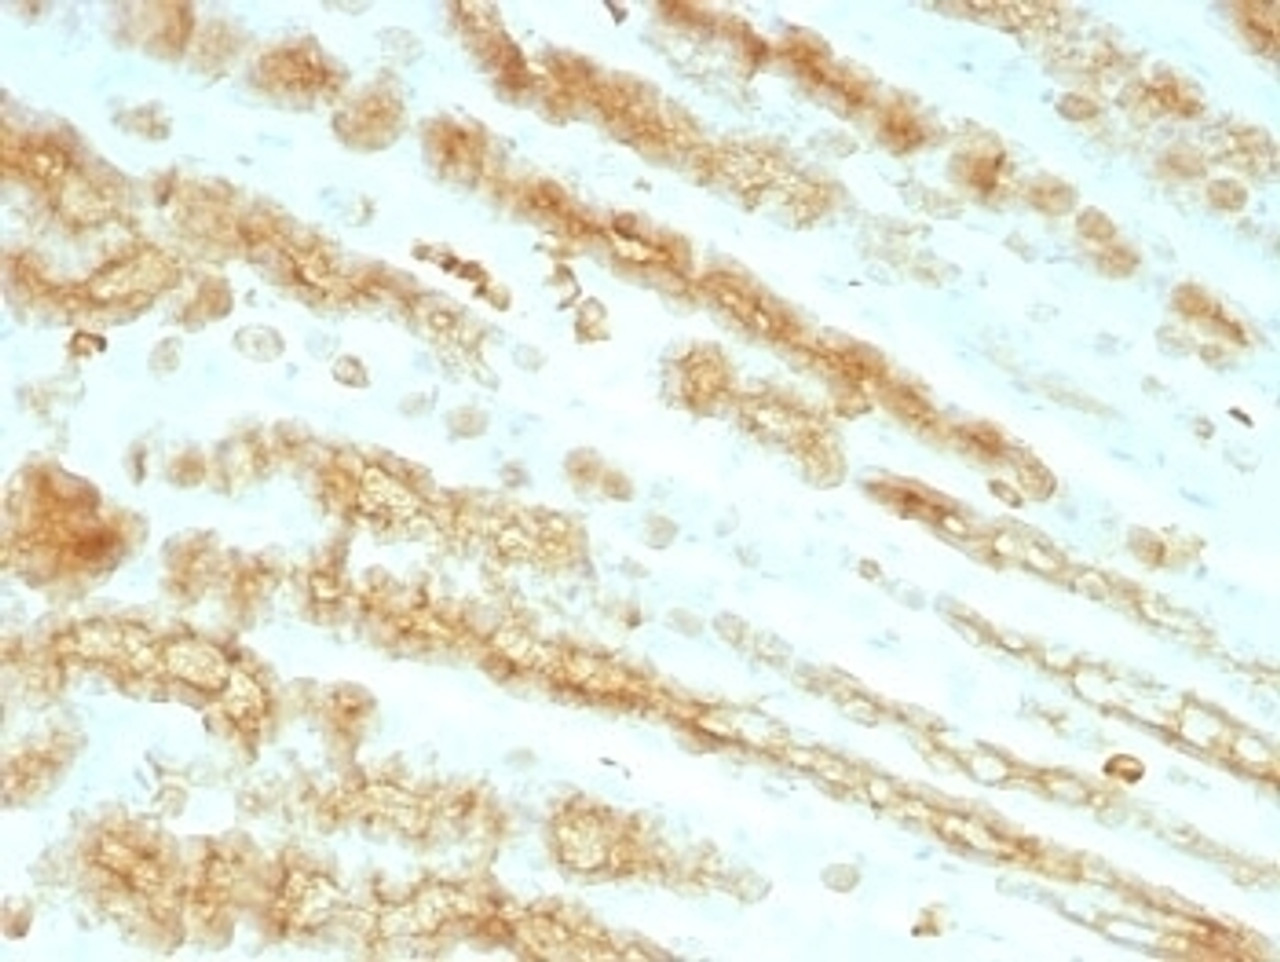 Formalin paraffin rat stomach stained with pan Cytokeratin antibody cocktail (KRTL/1077 + KRTH/1076) .